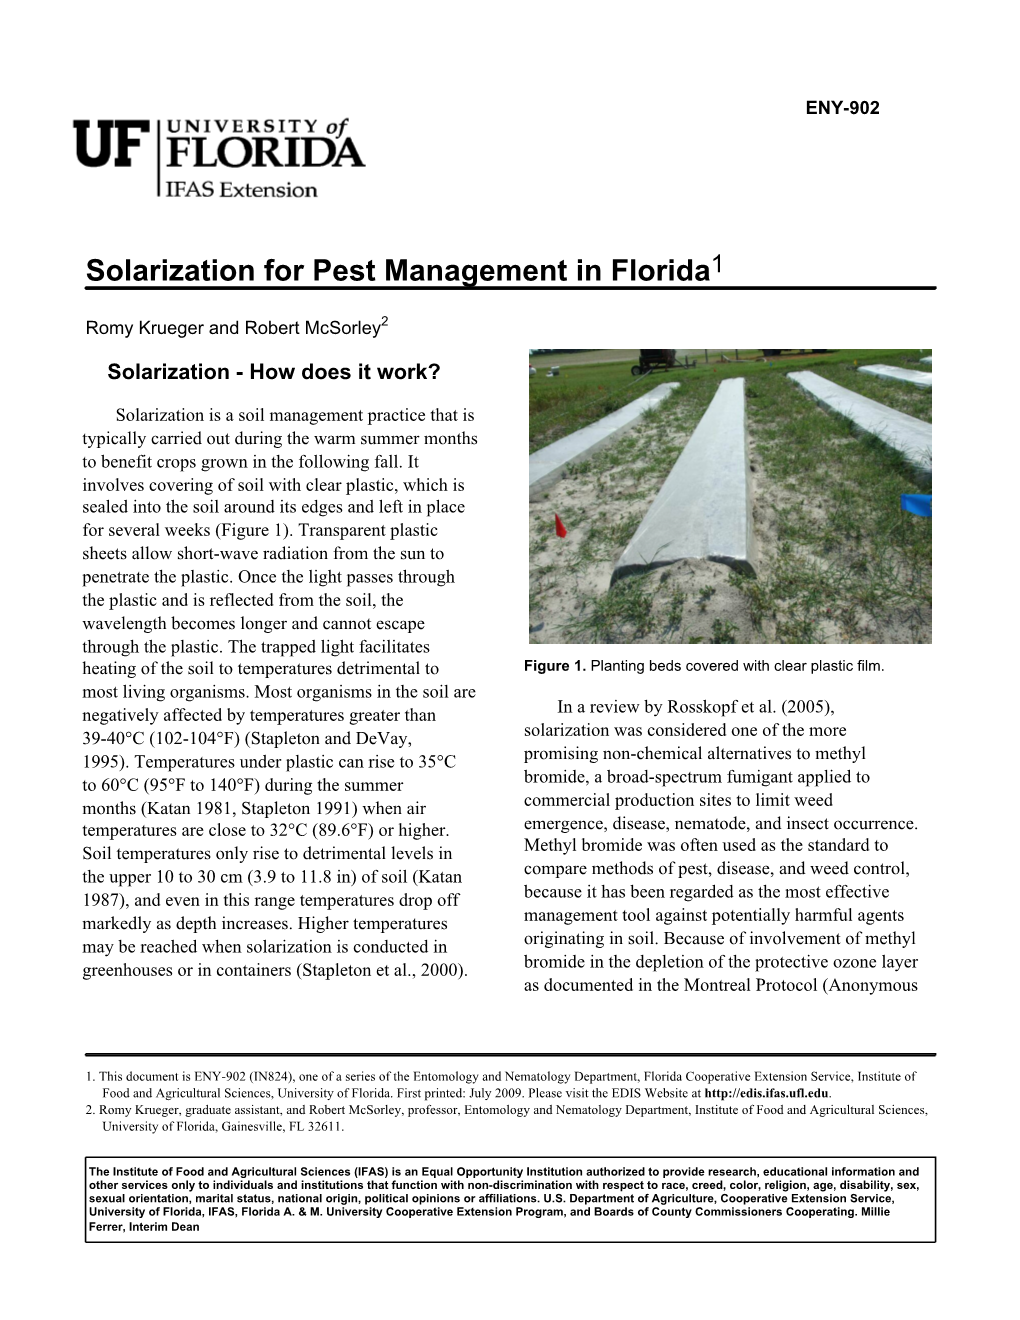 Solarization for Pest Management in Florida1